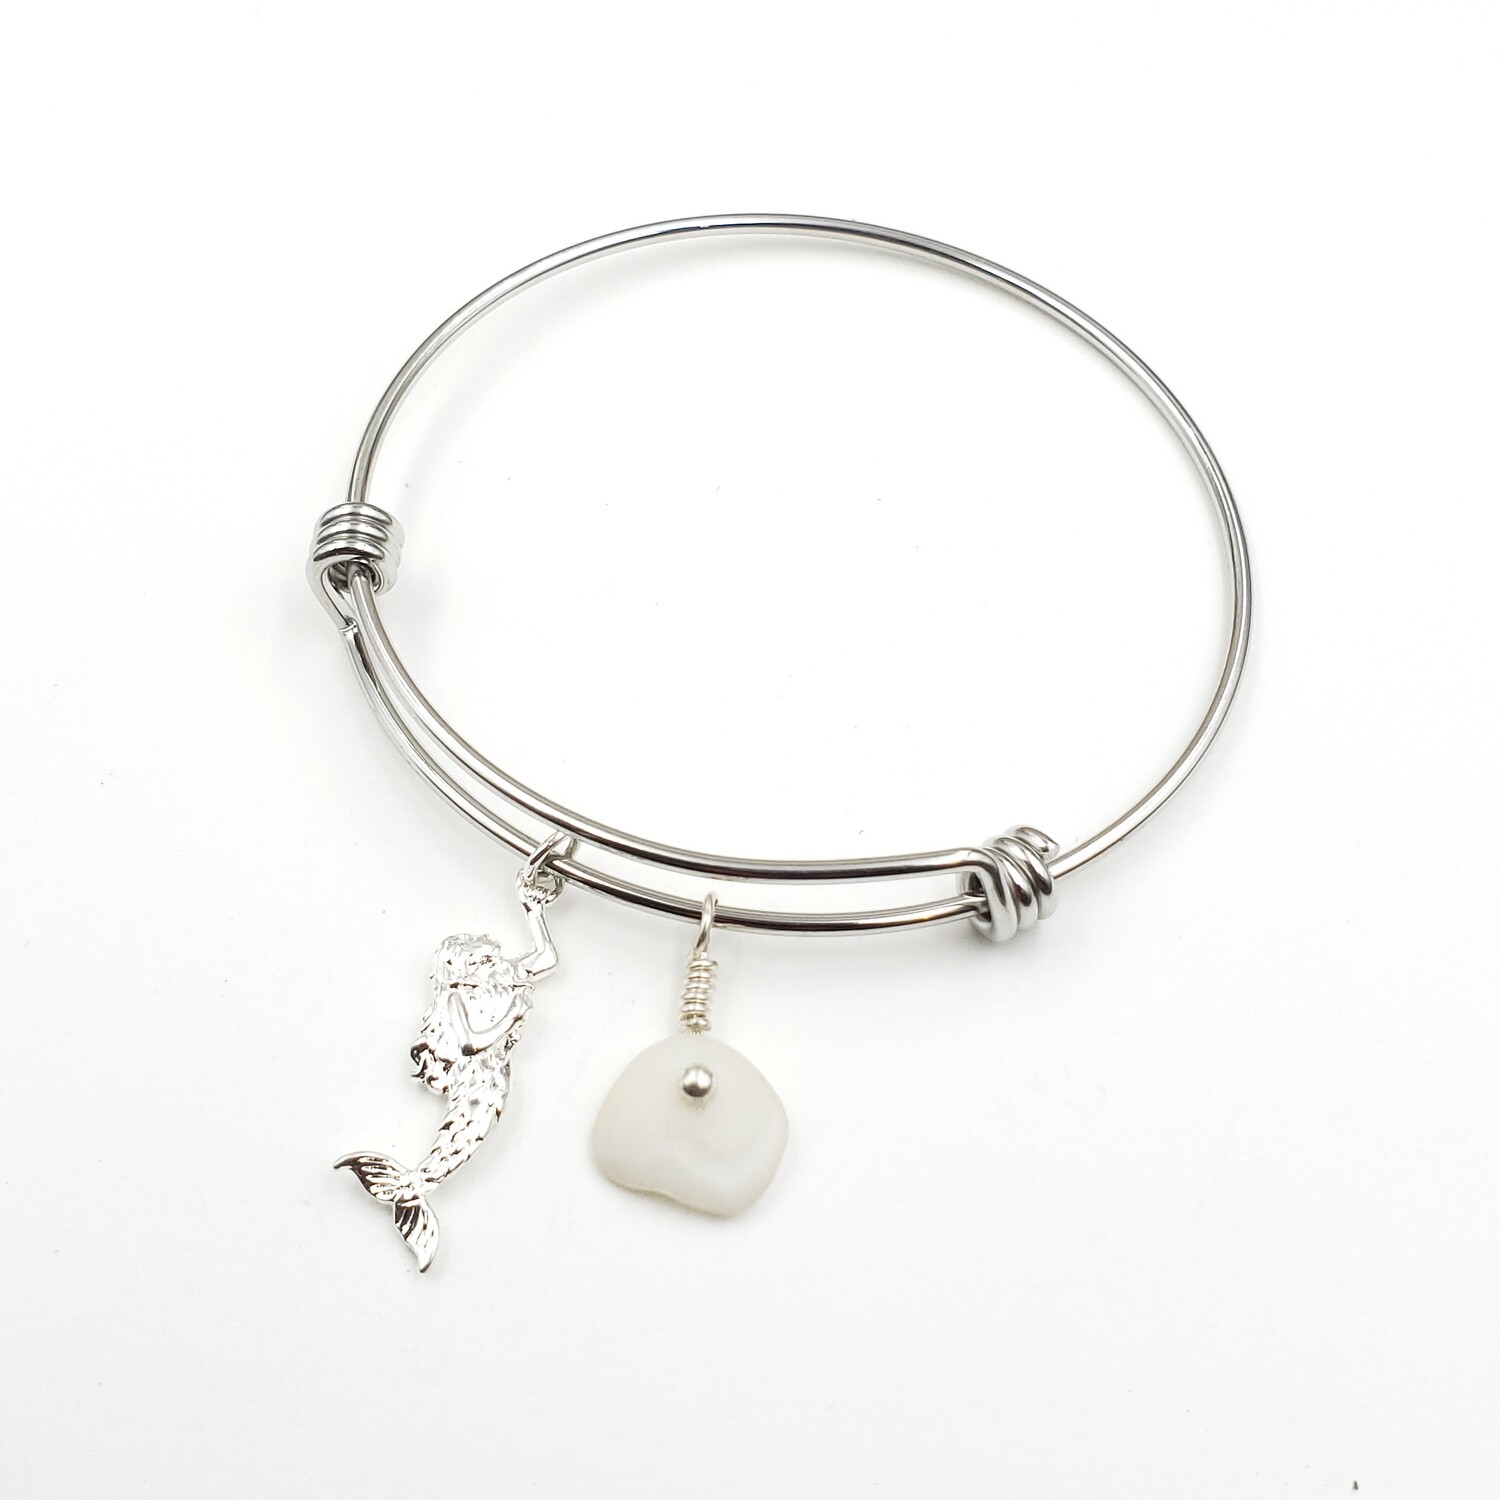 Bangle Bracelet with Mermaid Charm and Lake Erie Lucky Stone